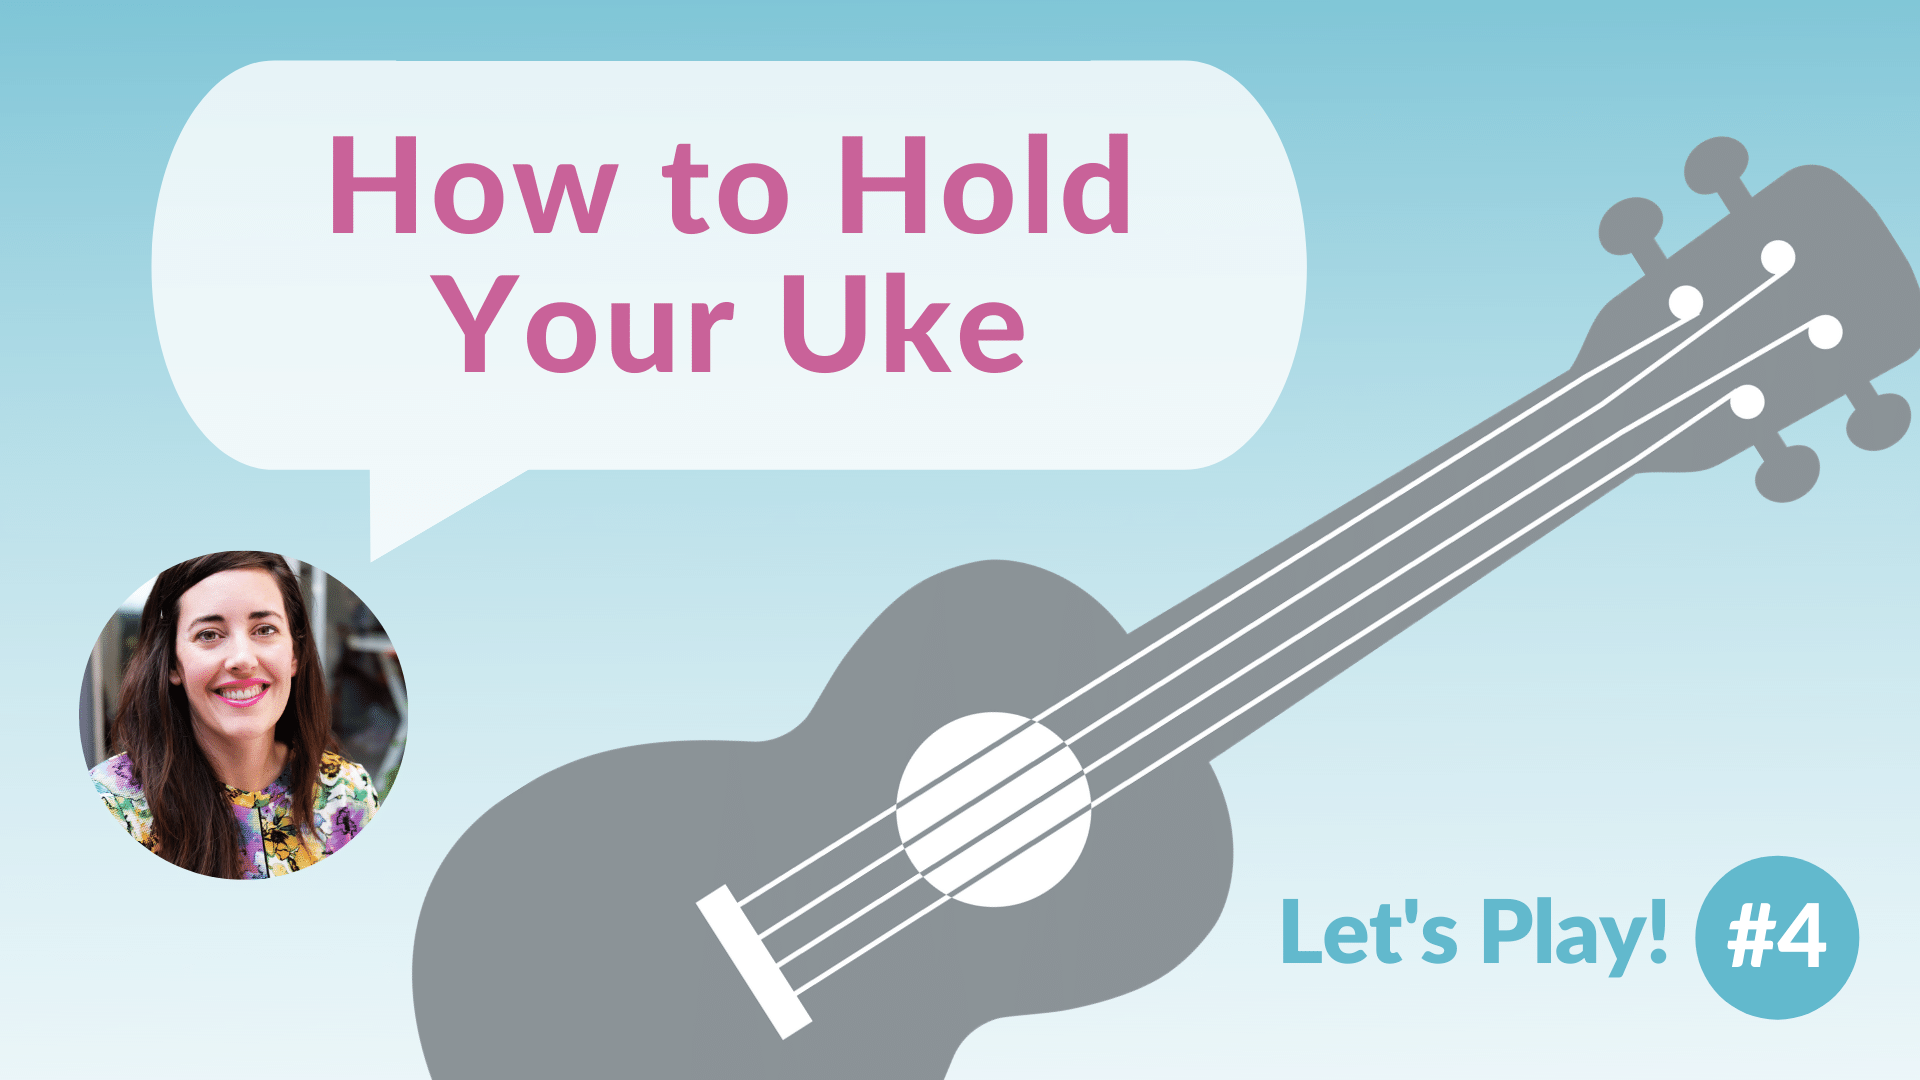 How to Hold Your Uke